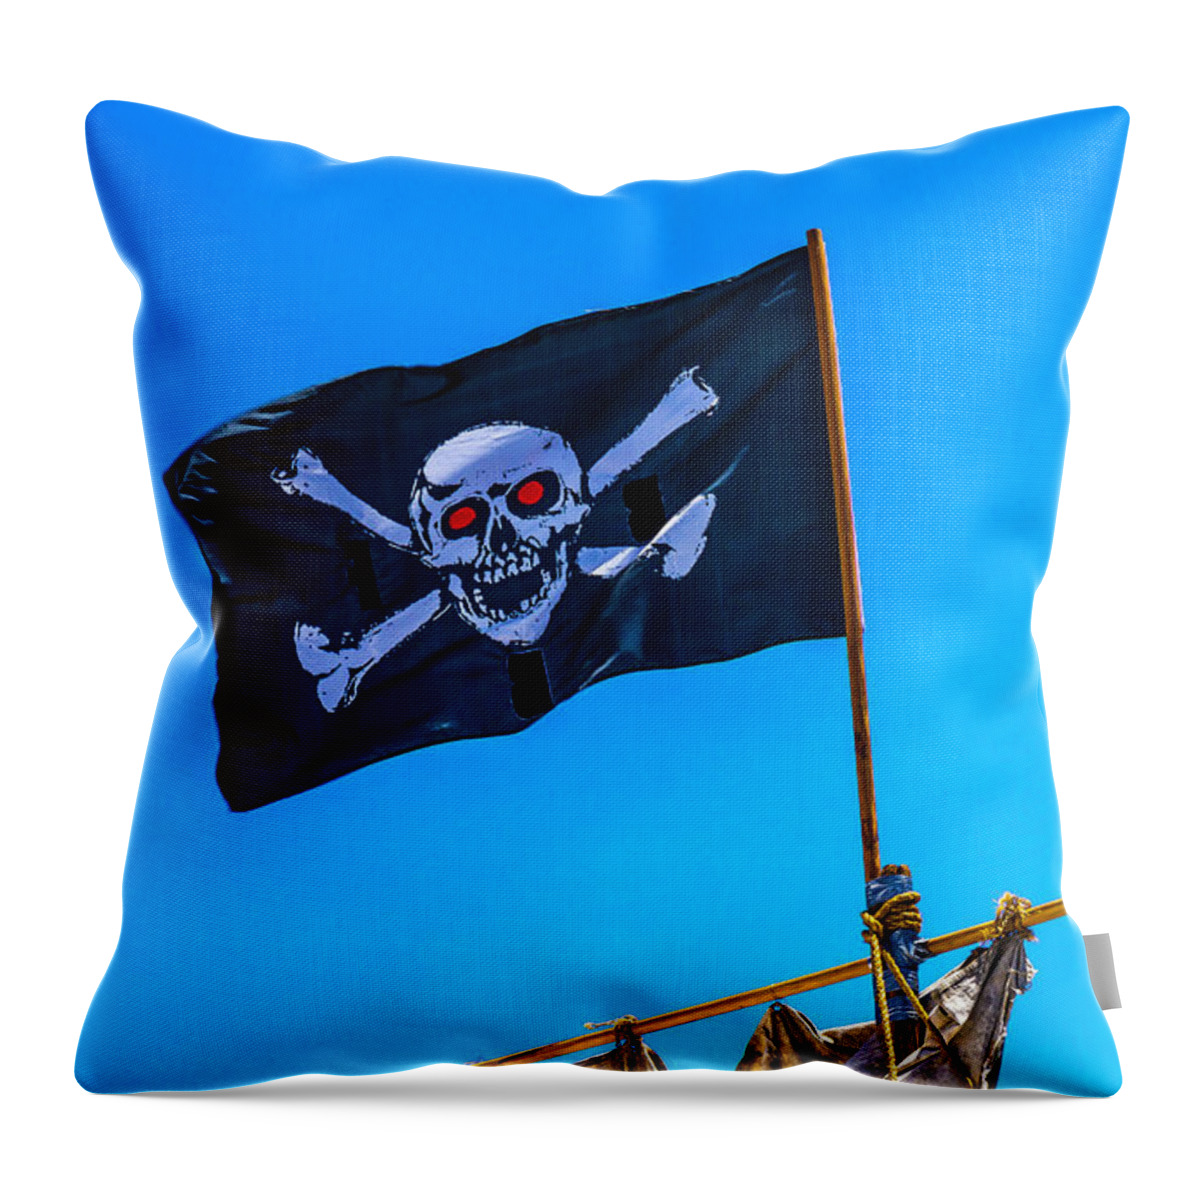 Pirate Flag Skull Cross Bones Throw Pillow featuring the photograph Pirates Death Black Flag by Garry Gay